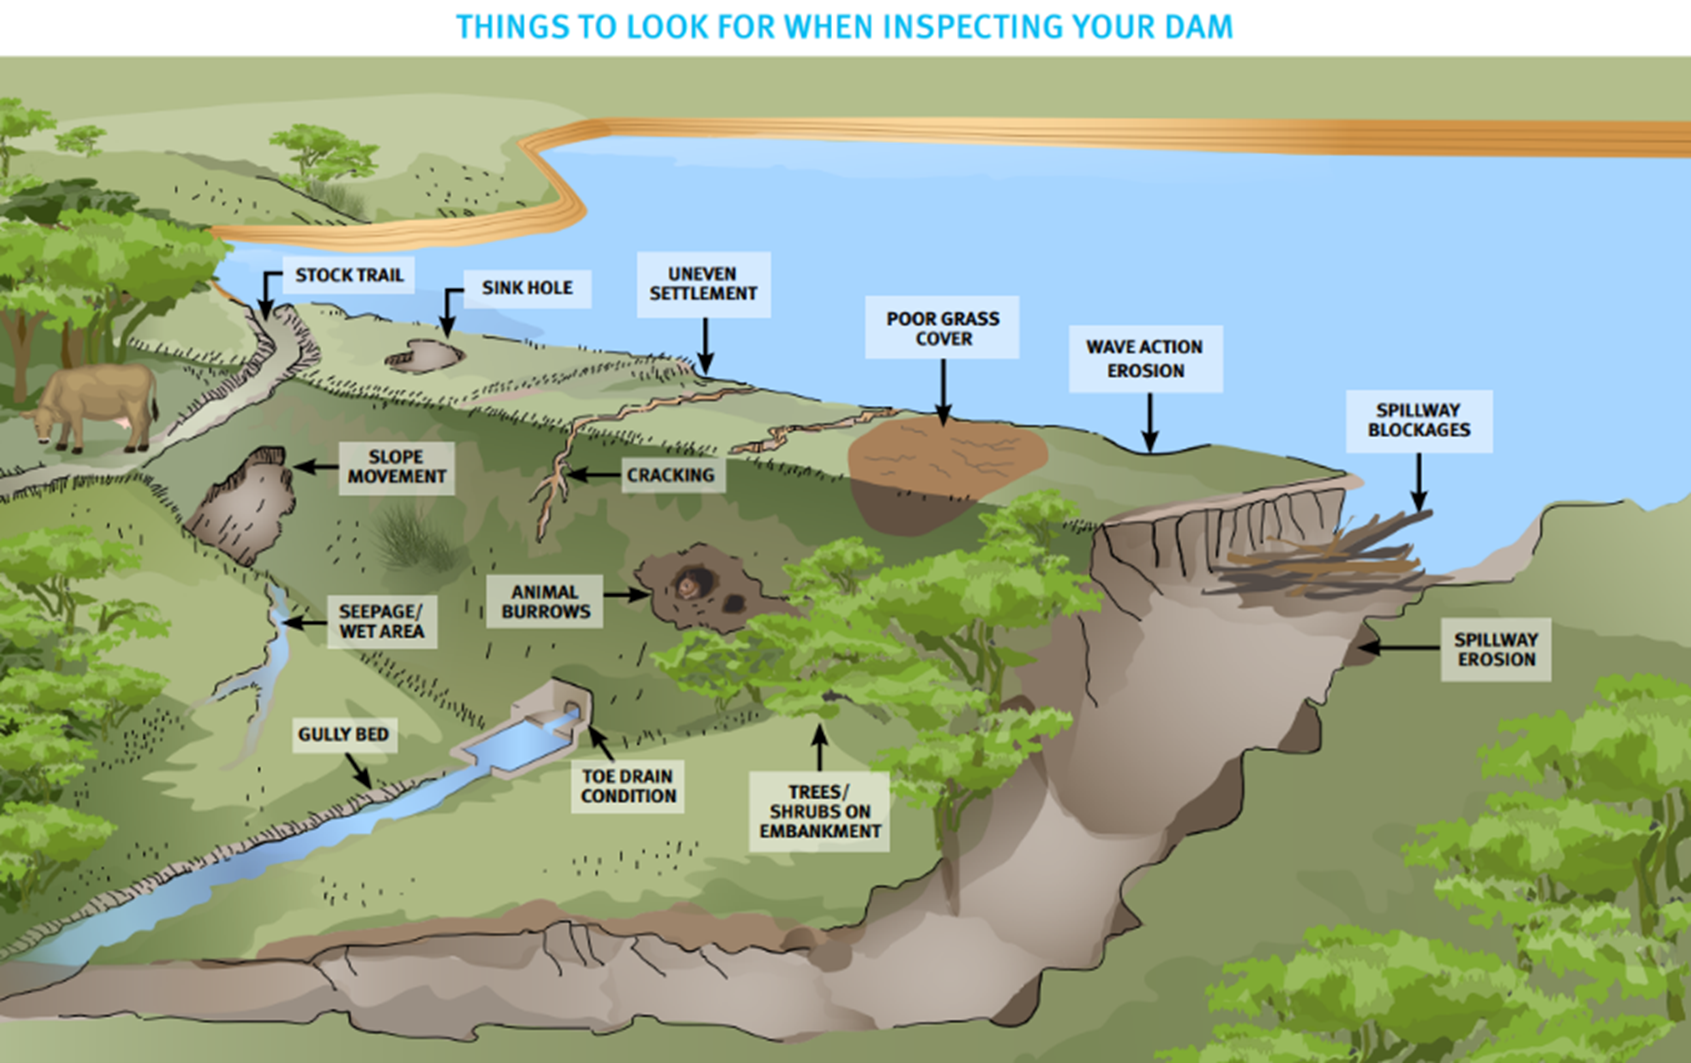 Things to look out for when inspecting your dam